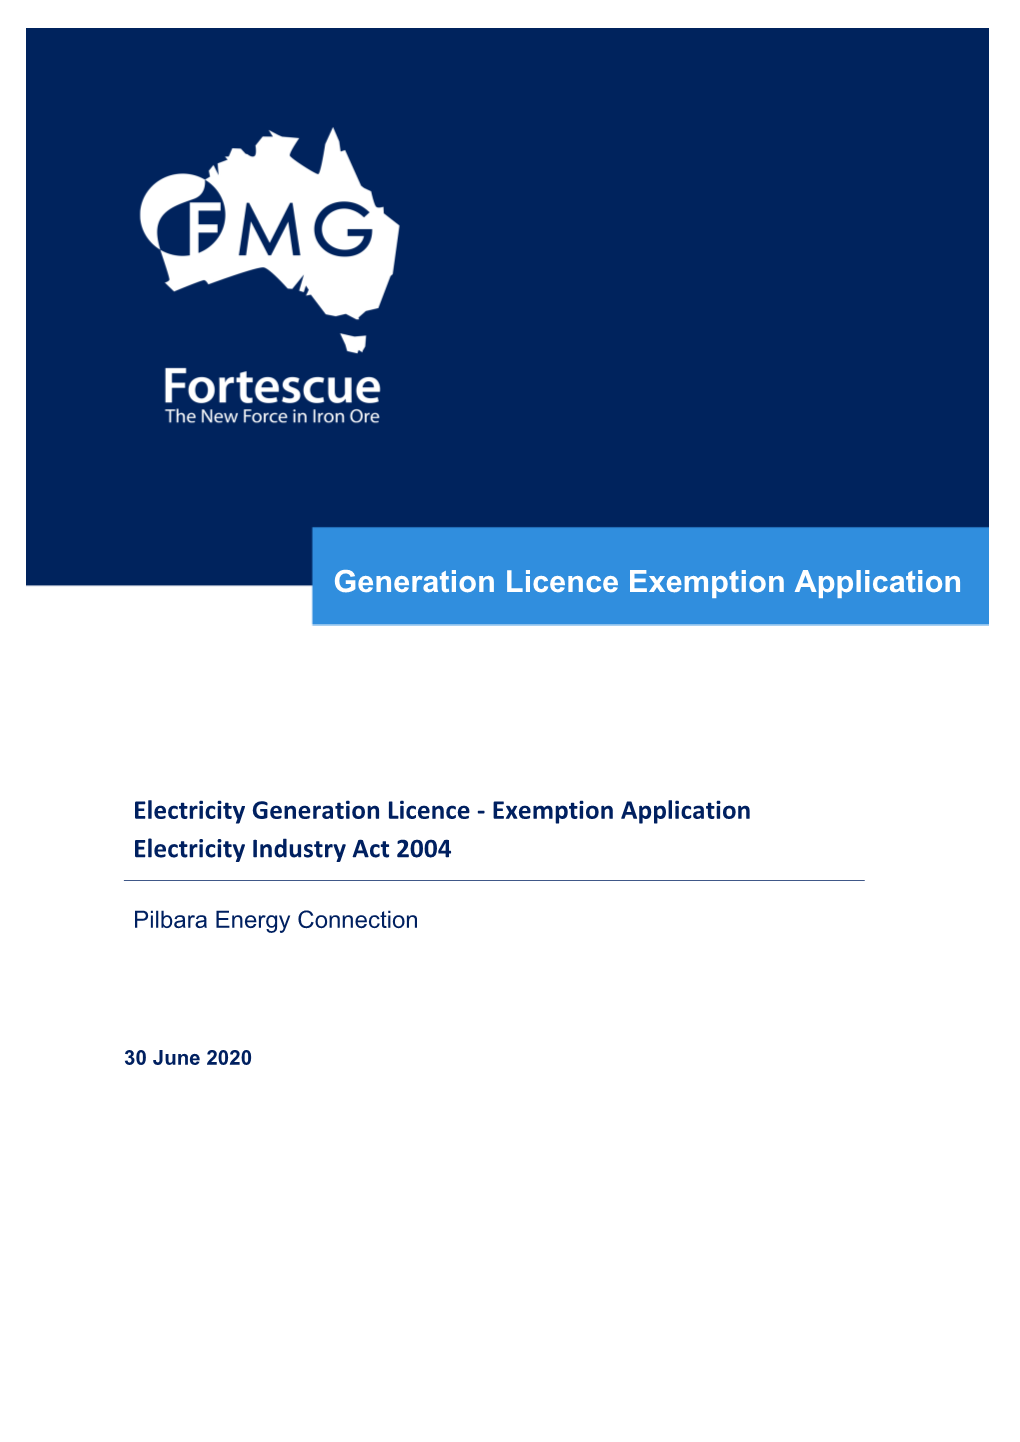 Electricity Generation Licence - Exemption Application Electricity Industry Act 2004